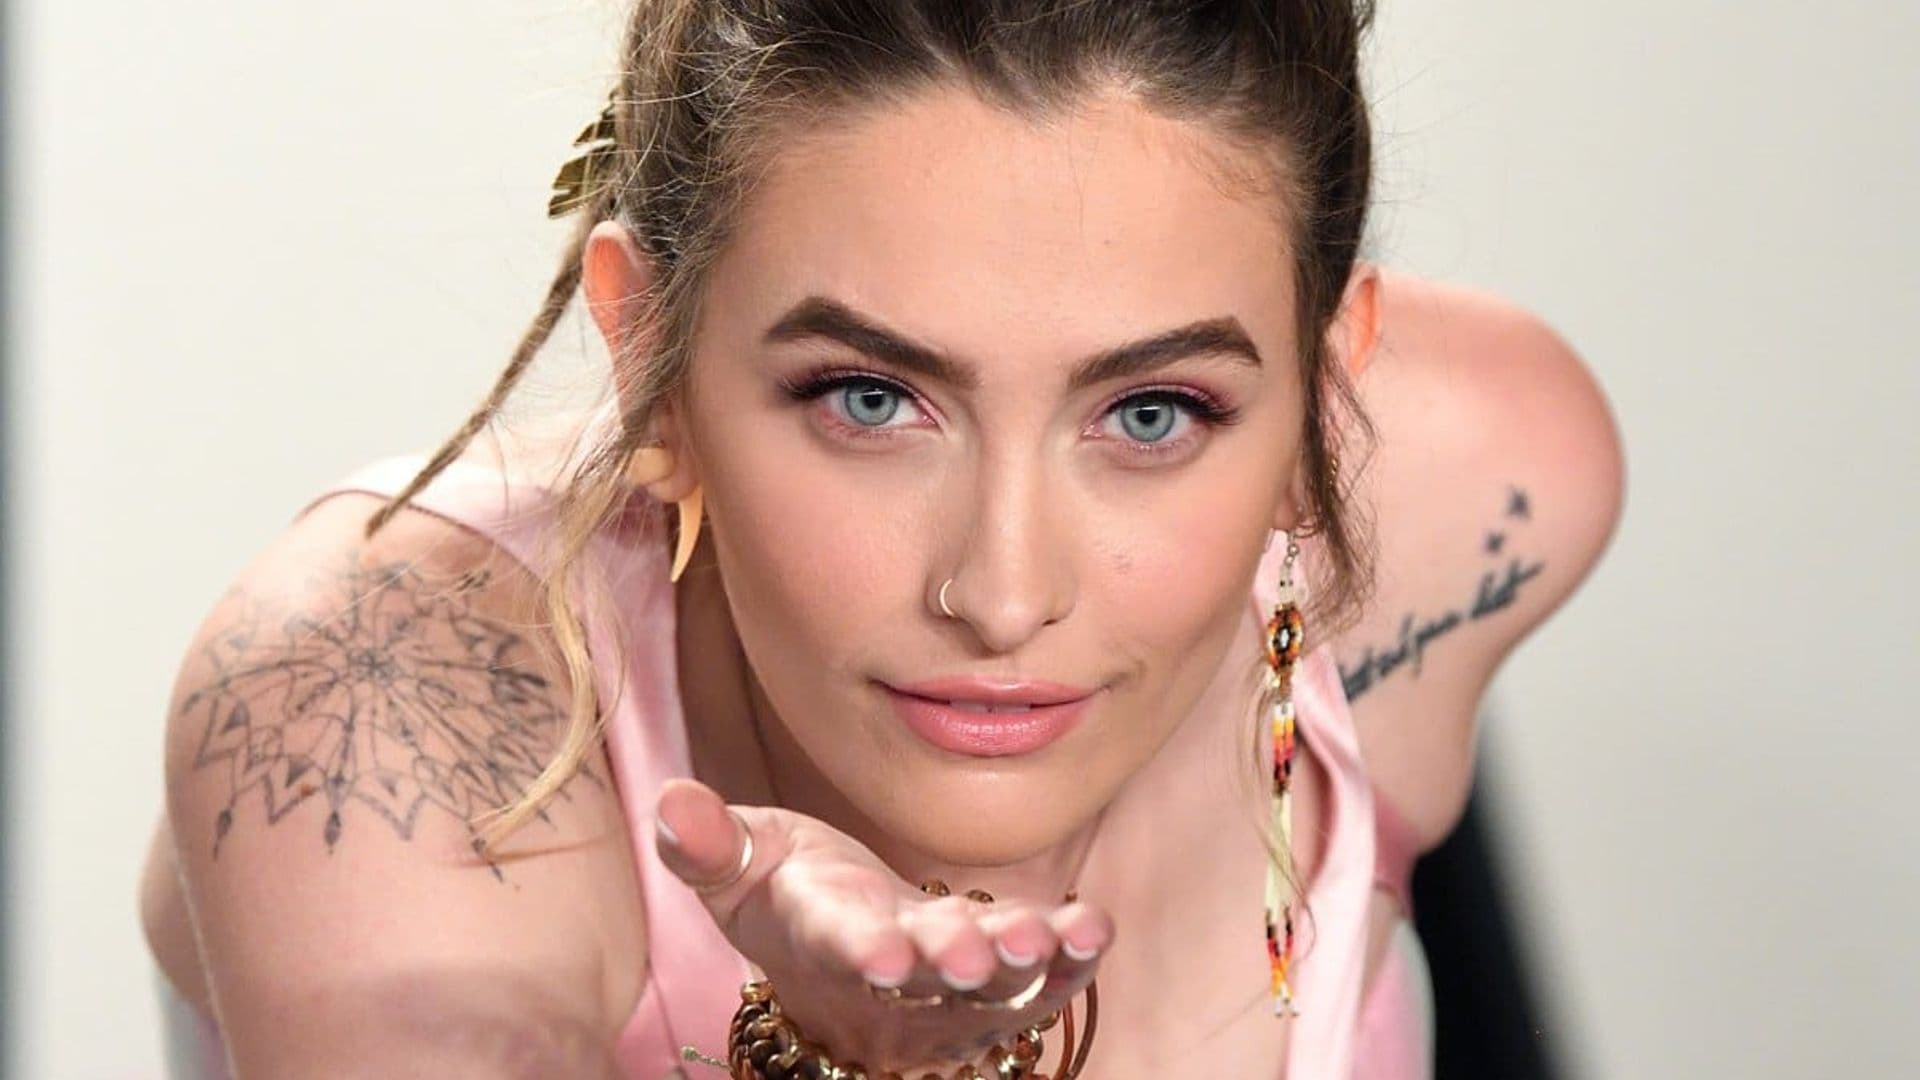 You won’t believe how Paris Jackson’s fingers ended up after playing guitar